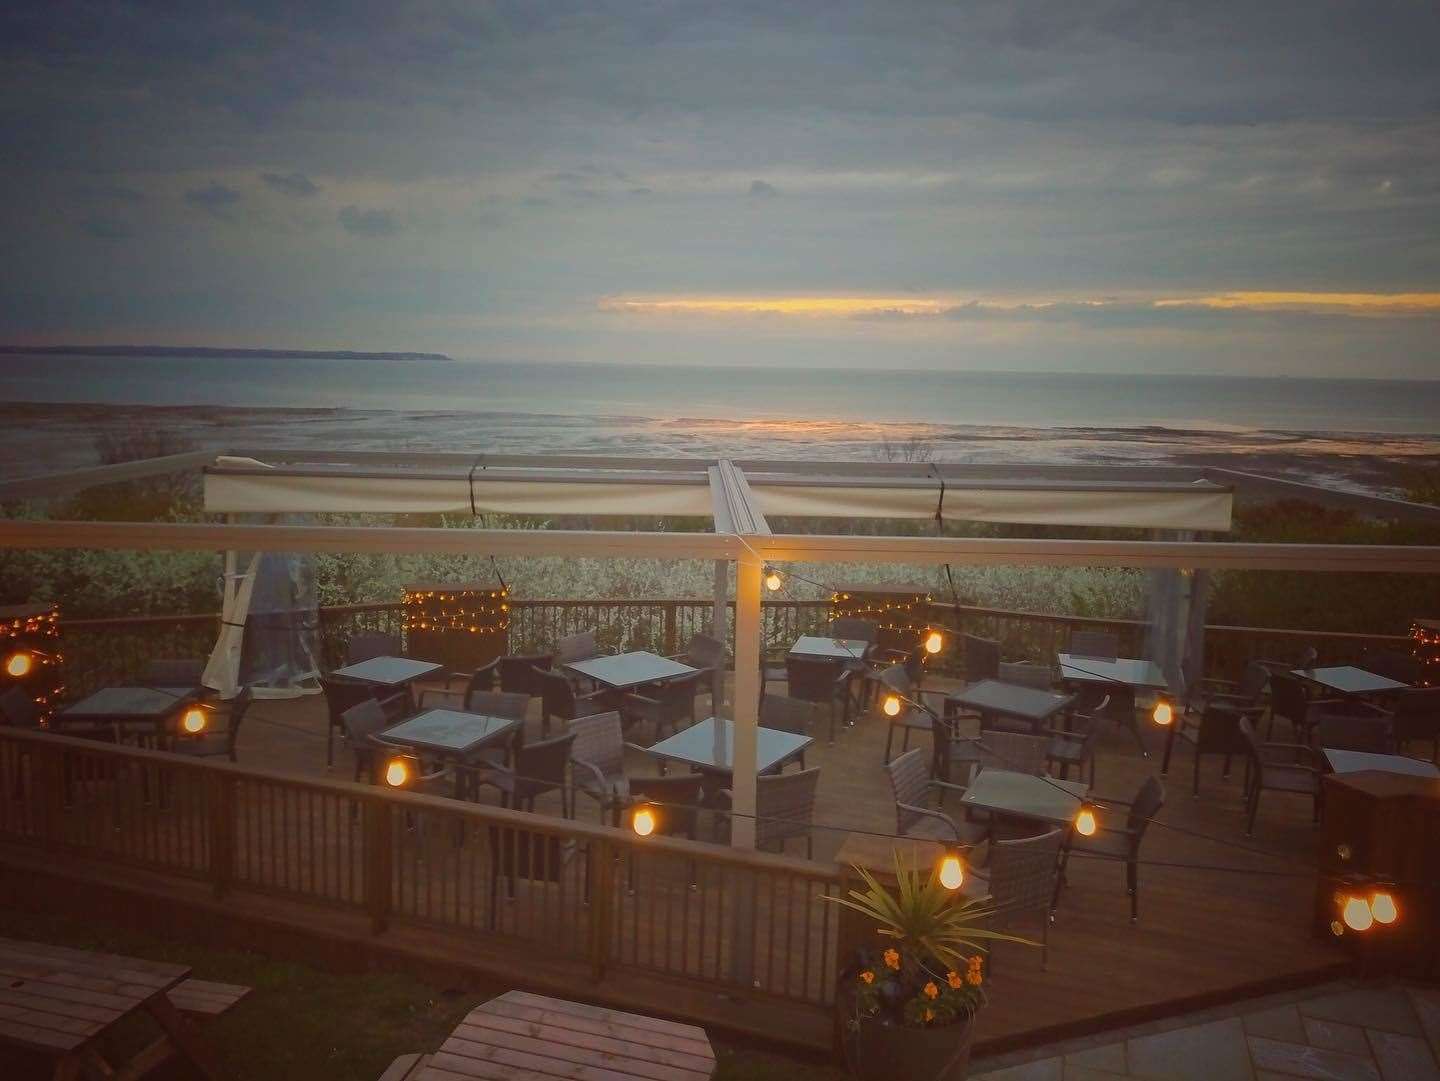 Stunning views from the garden at the Rose in Bloom in Seasalter: Picture: Paul Hadley Plastering Services